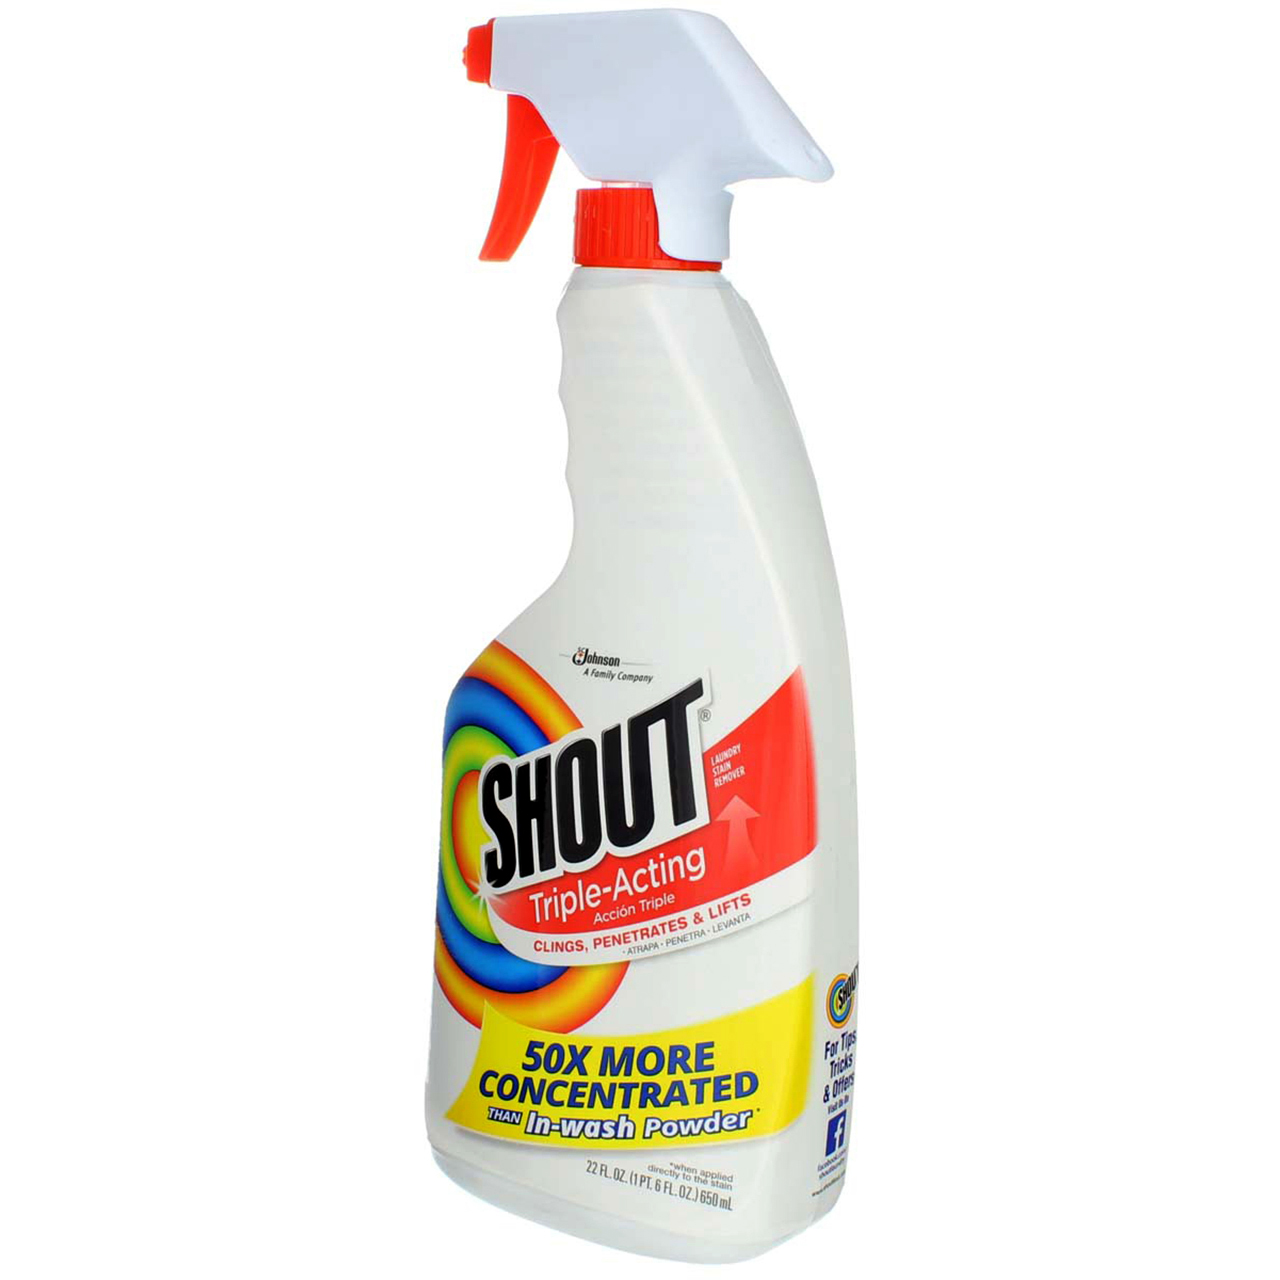 Shout Laundry Stain Remover Trigger Spray, 22 Fluid Ounce - image 4 of 4